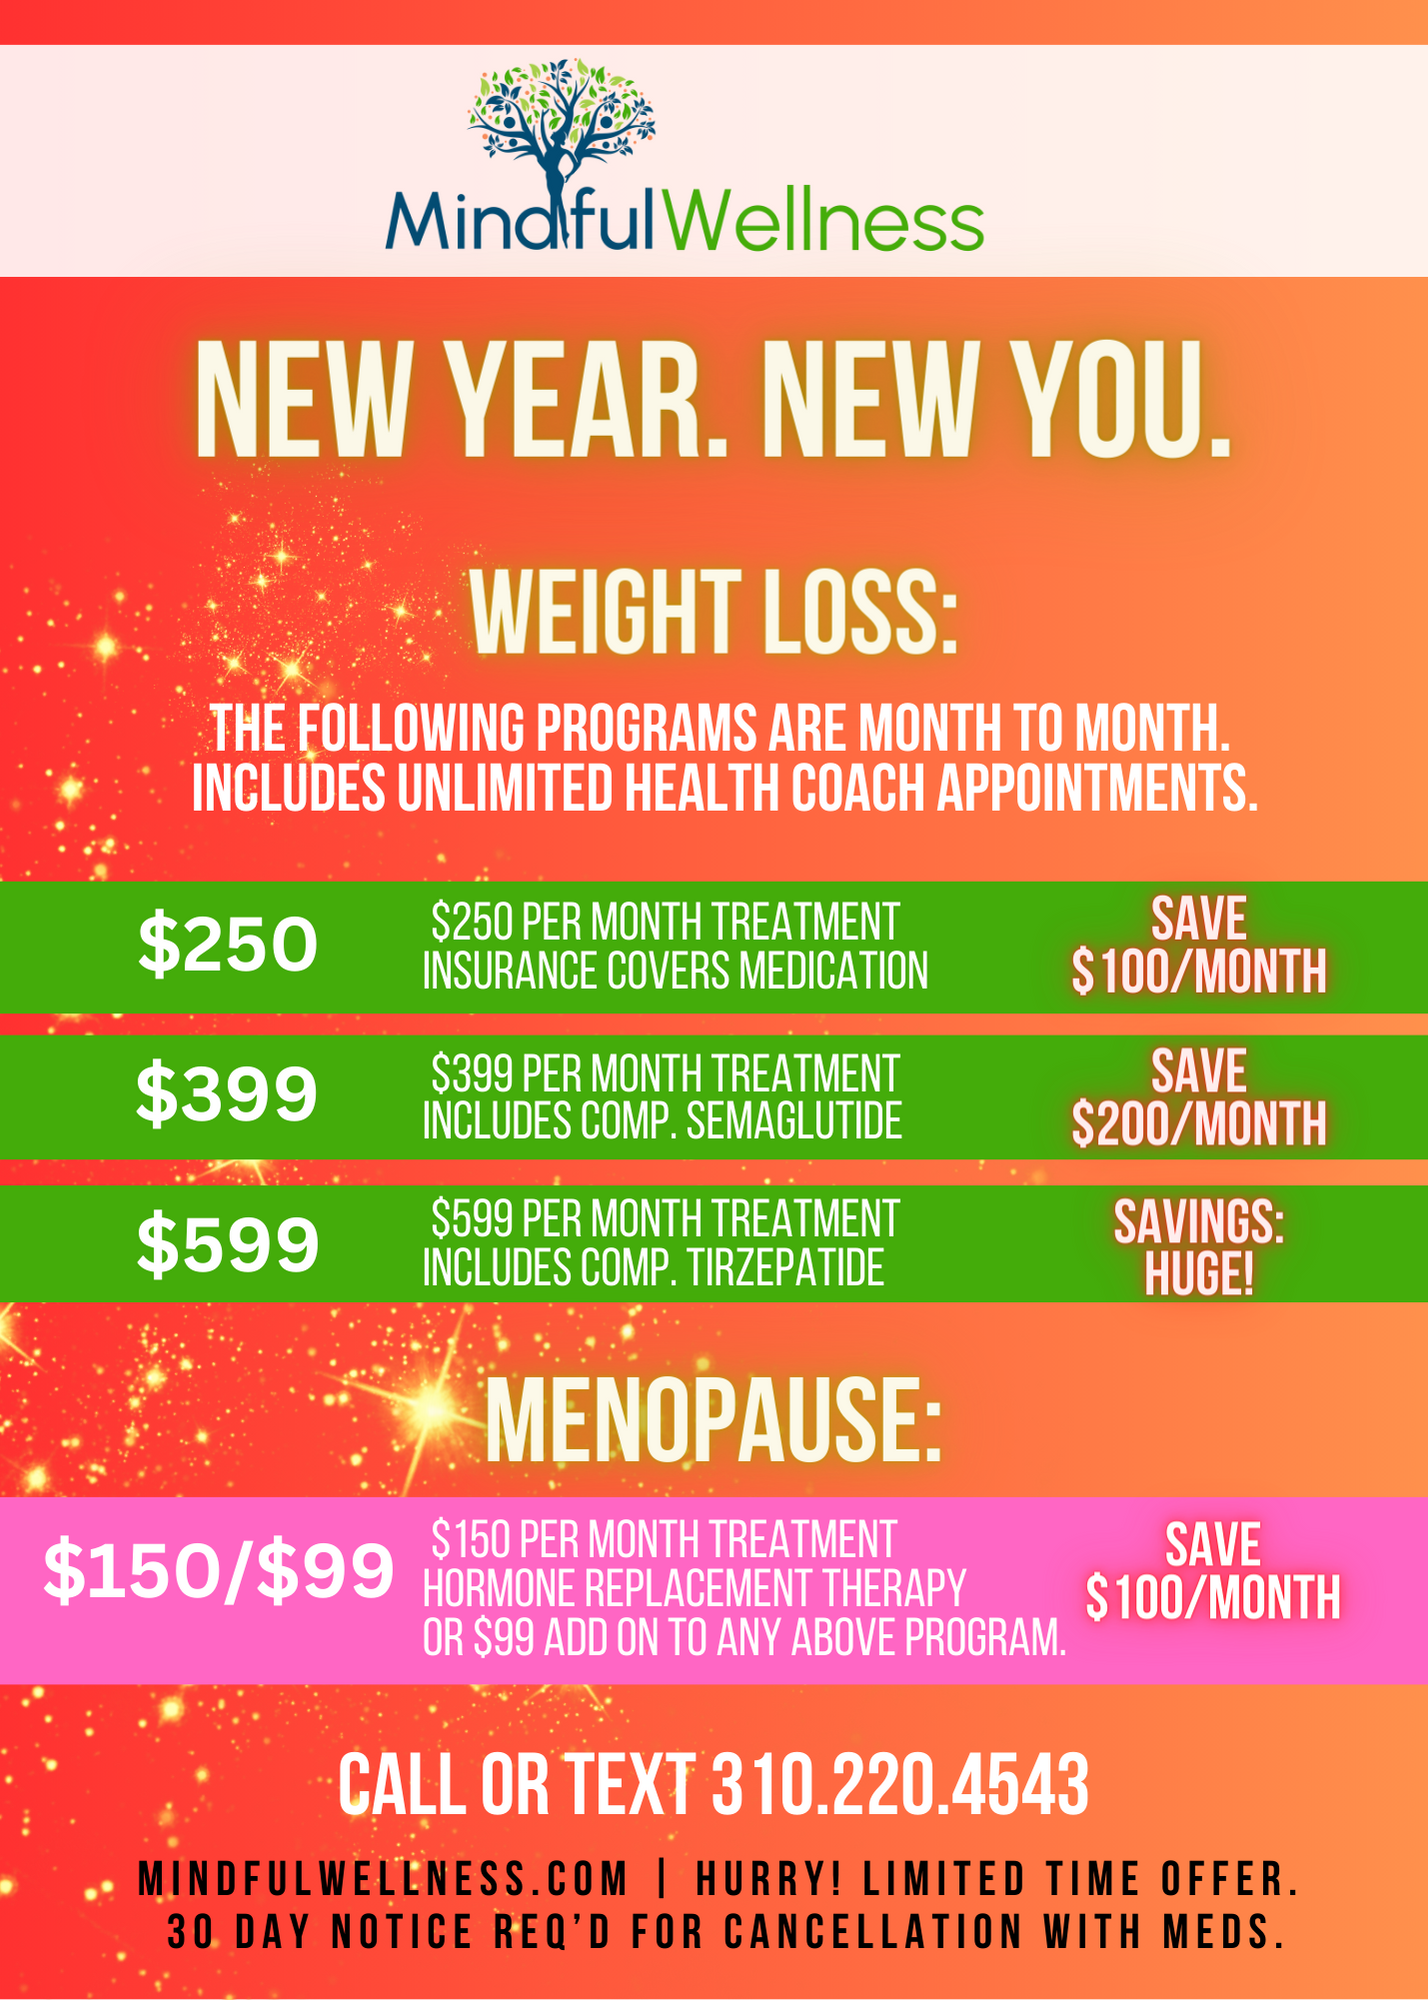 NEW YEAR! NEW YOU! MONTH TO MONTH PROGRAMS. (1)